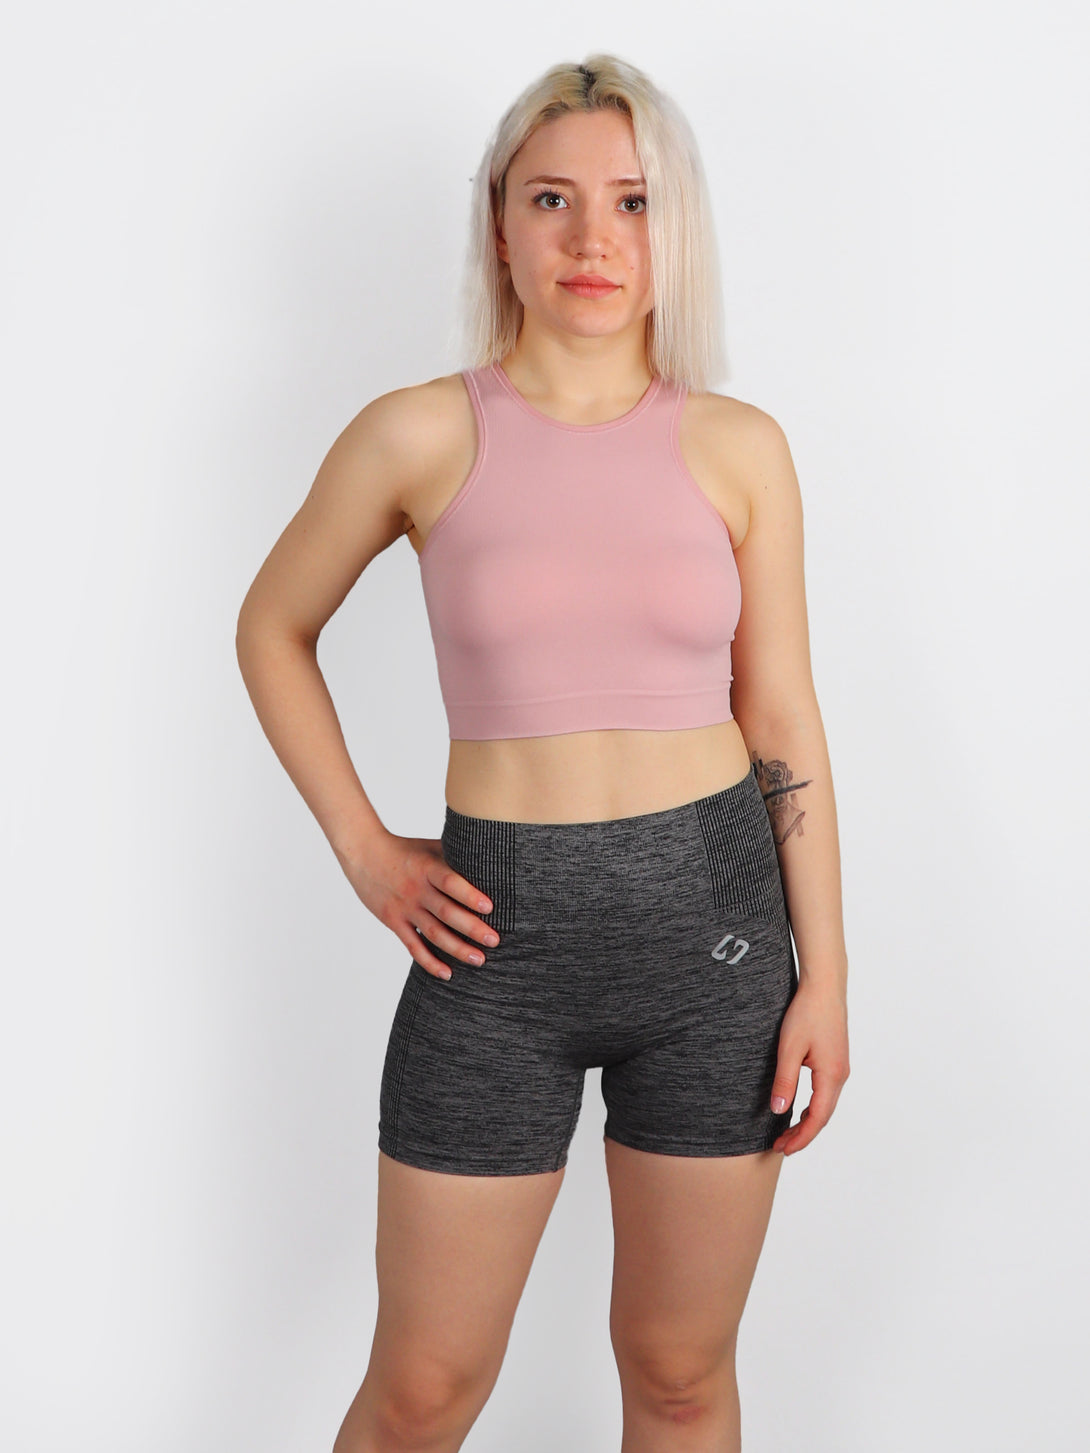 A Woman Wearing Pale Mauve Color All-Day Seamless Sleeveless Crop Top